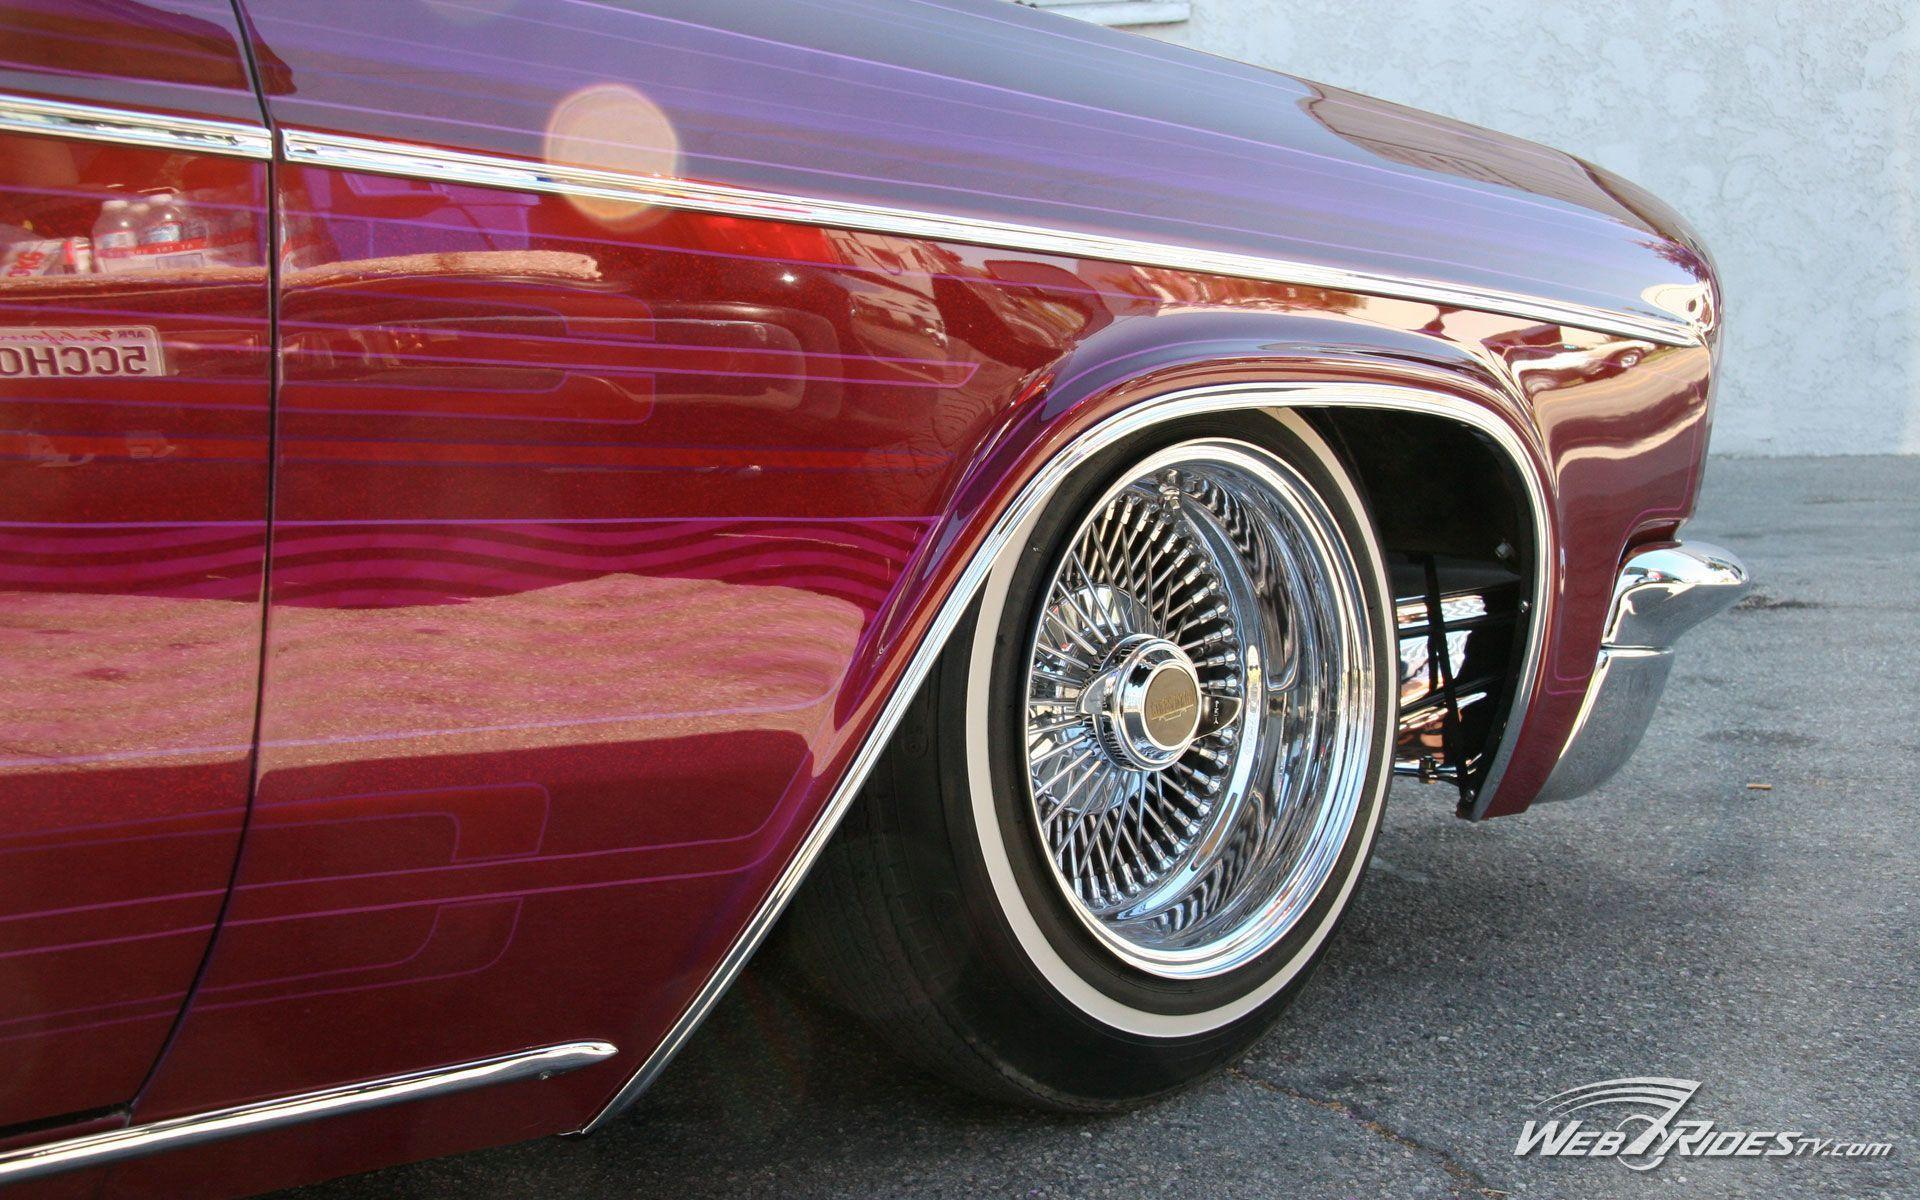 Free Lowrider Car Wallpaper High Resolution Background For Laptop